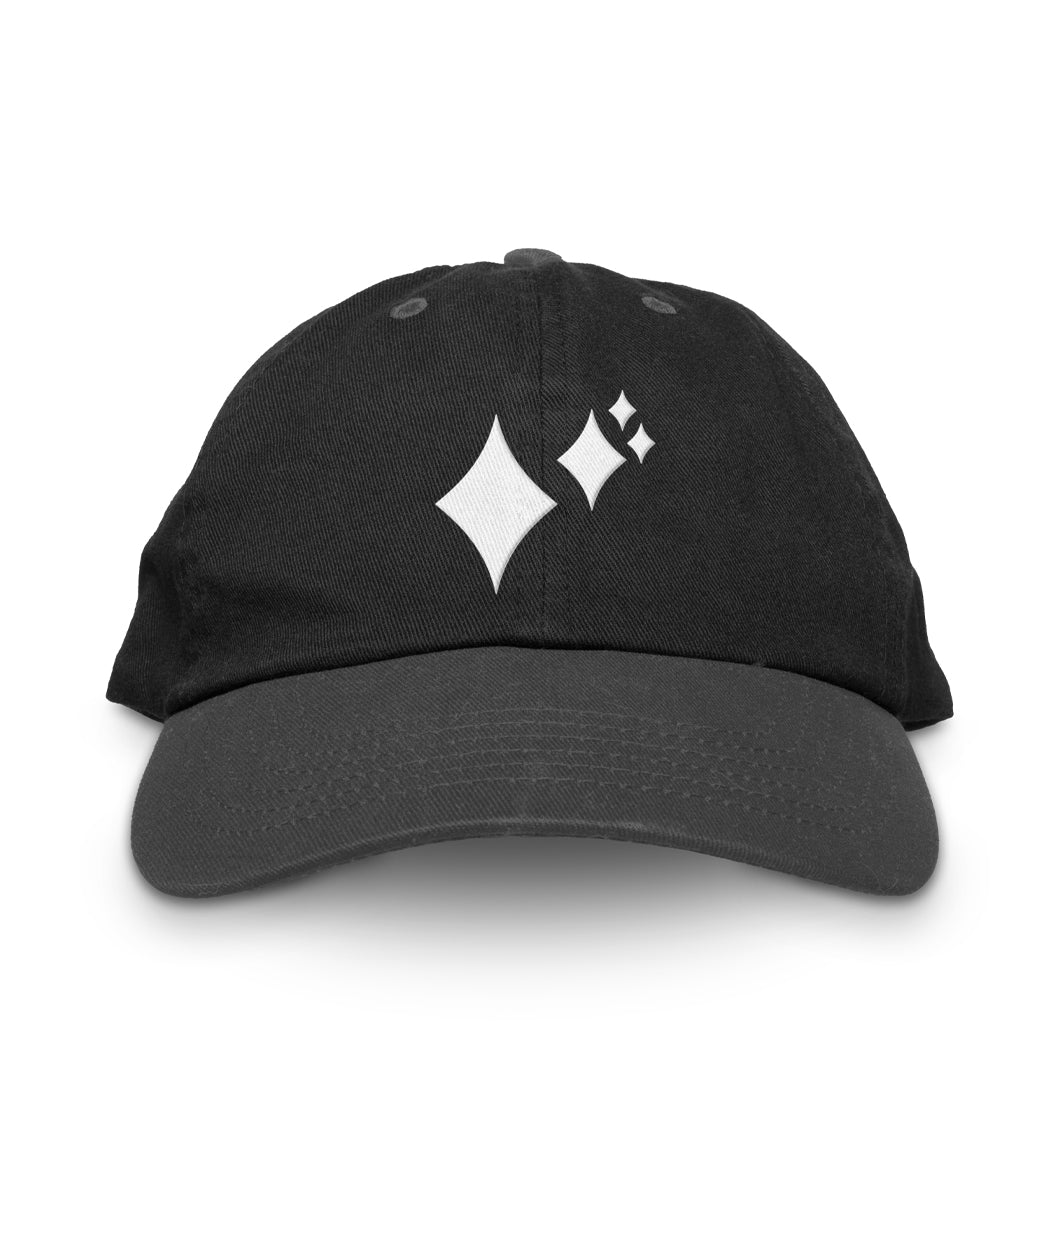 Black polo hat with white embroidery design of four pointed stars on them. There is one large star to the left, a medium star on the right of the large star, and two small stars to the right of the medium star. 